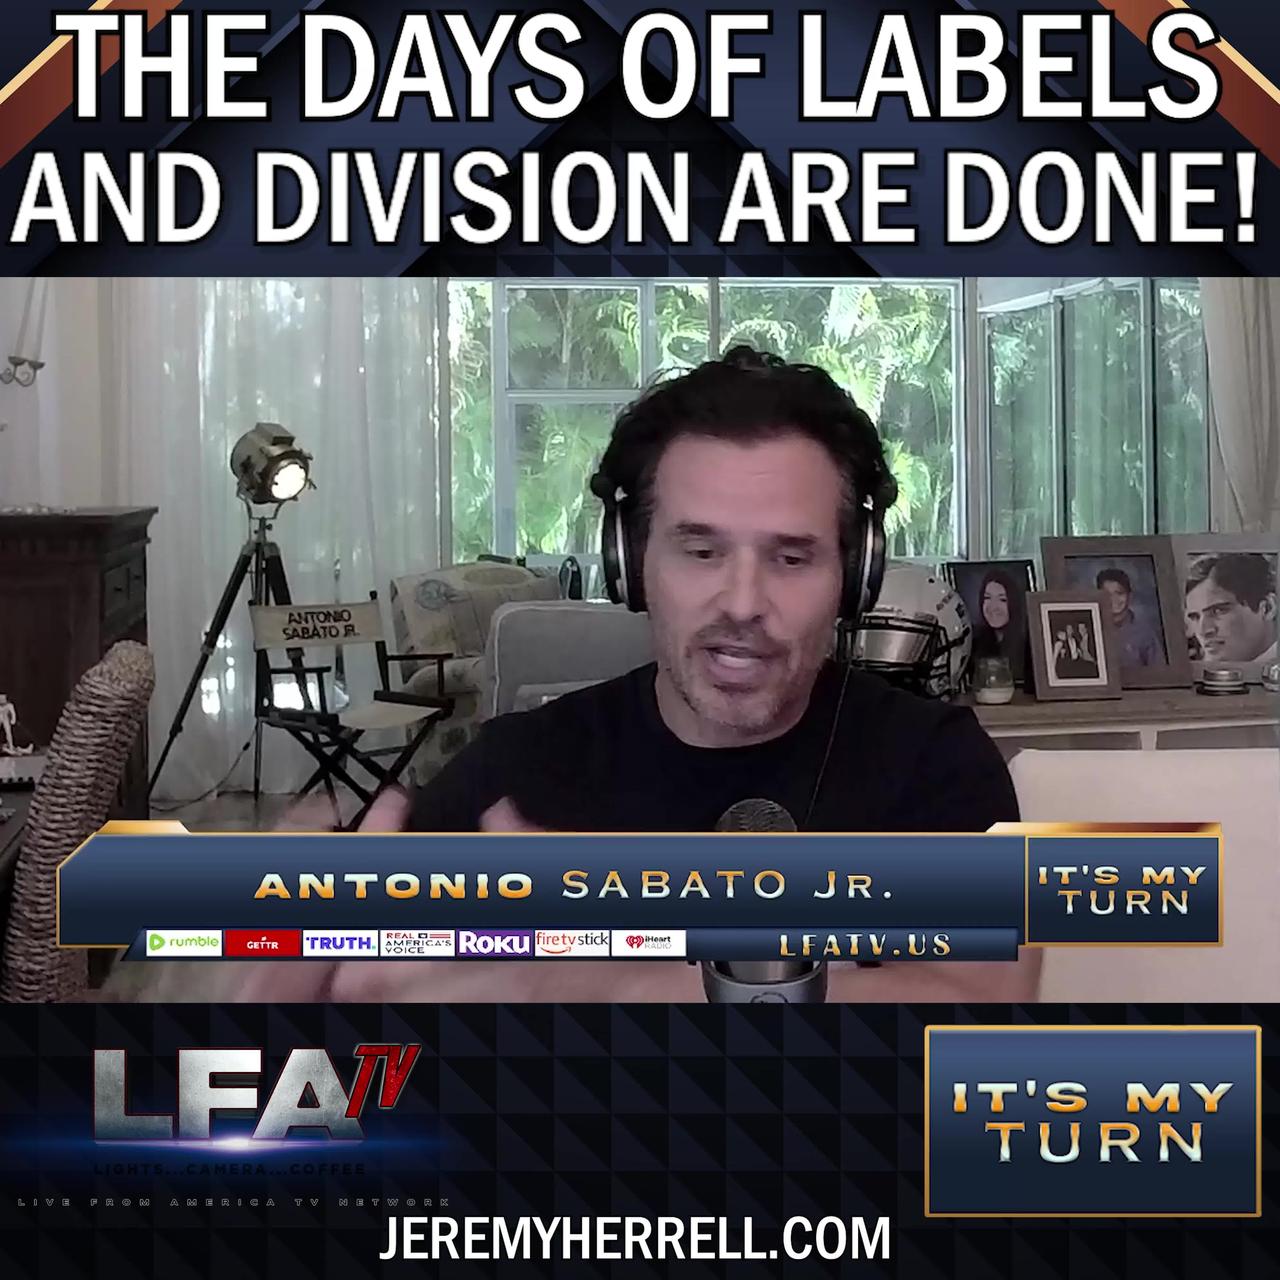 LFA TV SHORT CLIP: THE LEFT WING LABELS AND DIVISION TACTICS ARE DONE!